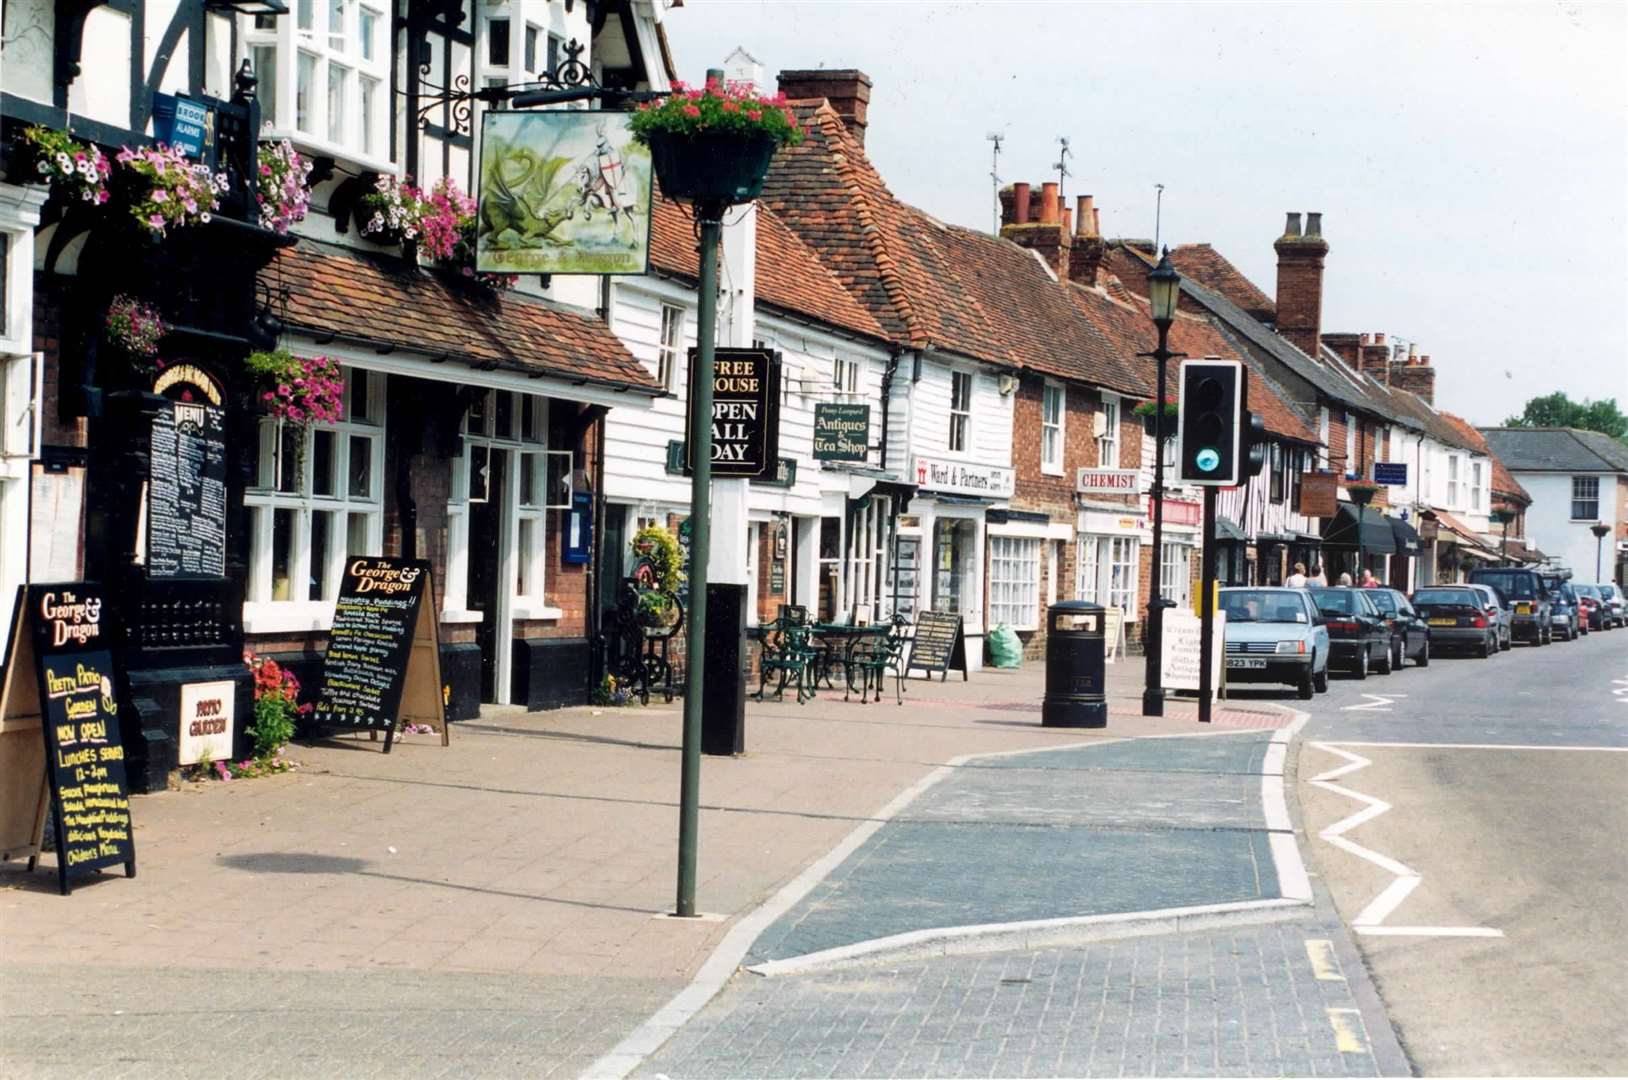 The George and Dragon pub in Headcorn High Street in 1999